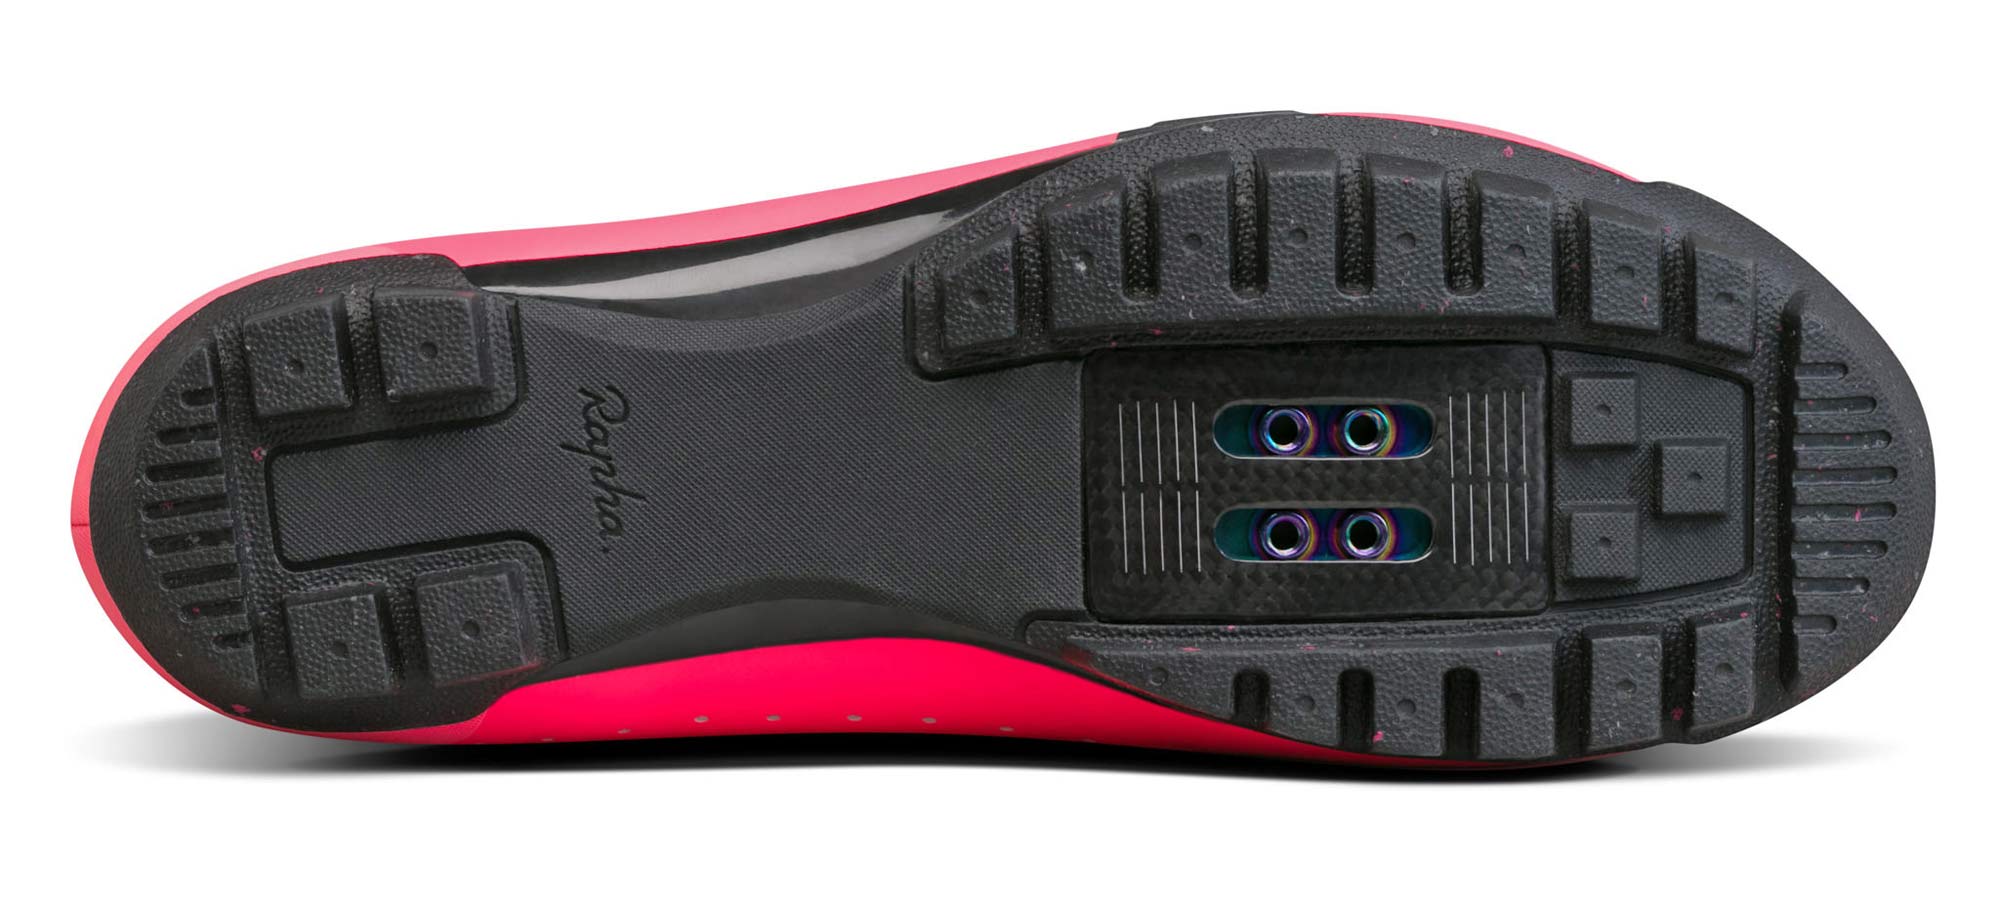 Rapha Explore gravel bike shoes & Classic road bike shoes were developed in-house by Rapha, road & off-road riding